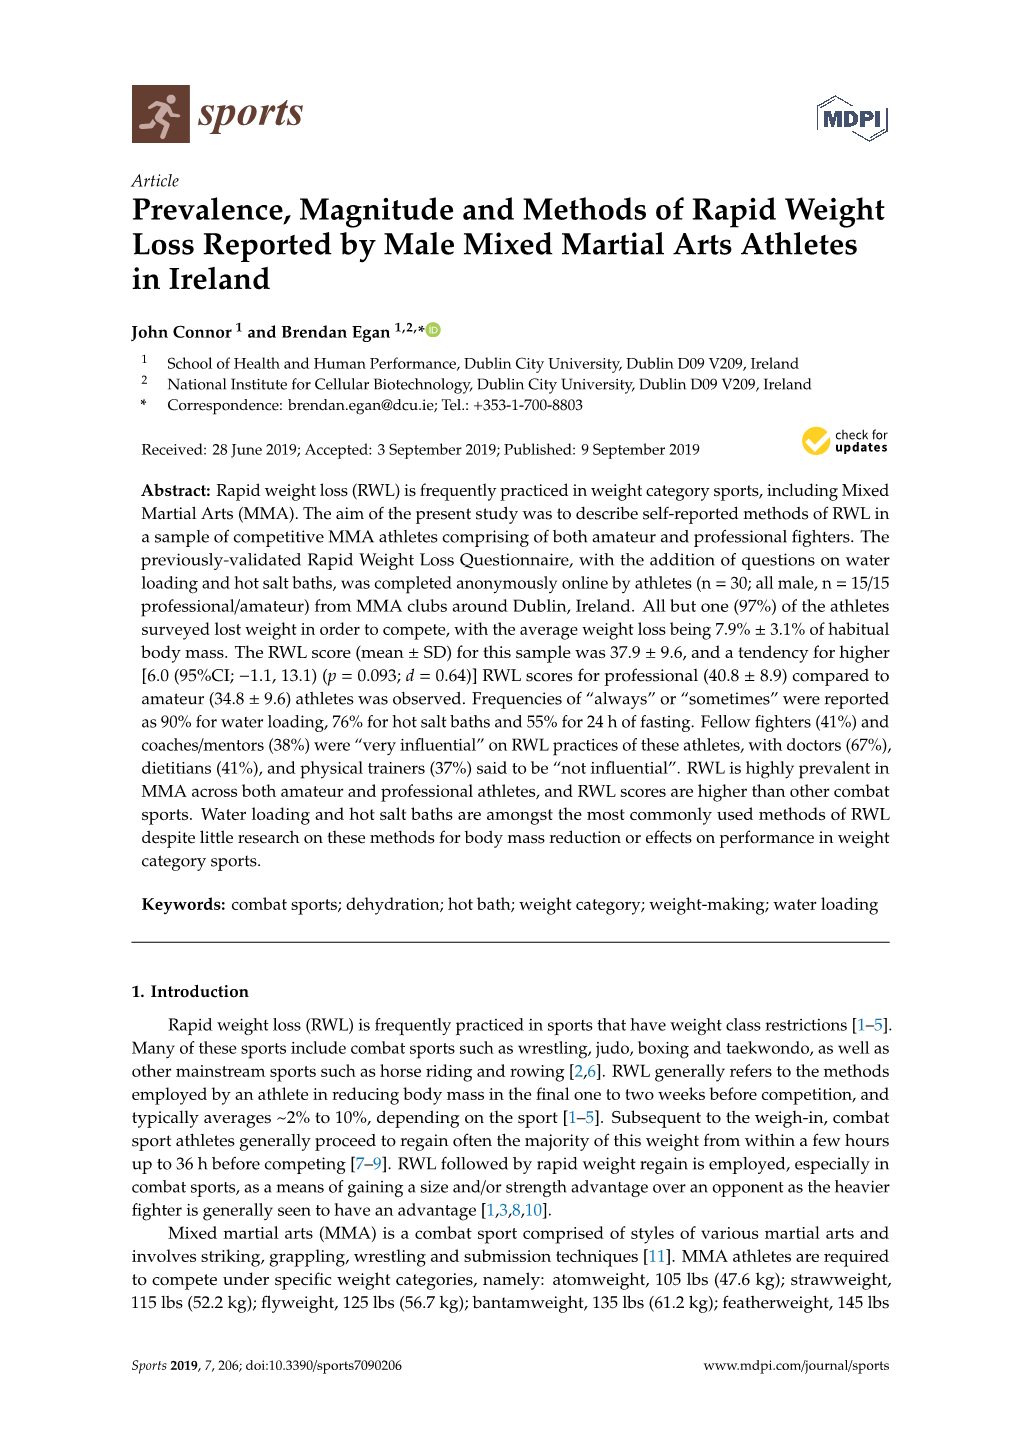 Prevalence, Magnitude and Methods of Rapid Weight Loss Reported by Male Mixed Martial Arts Athletes in Ireland